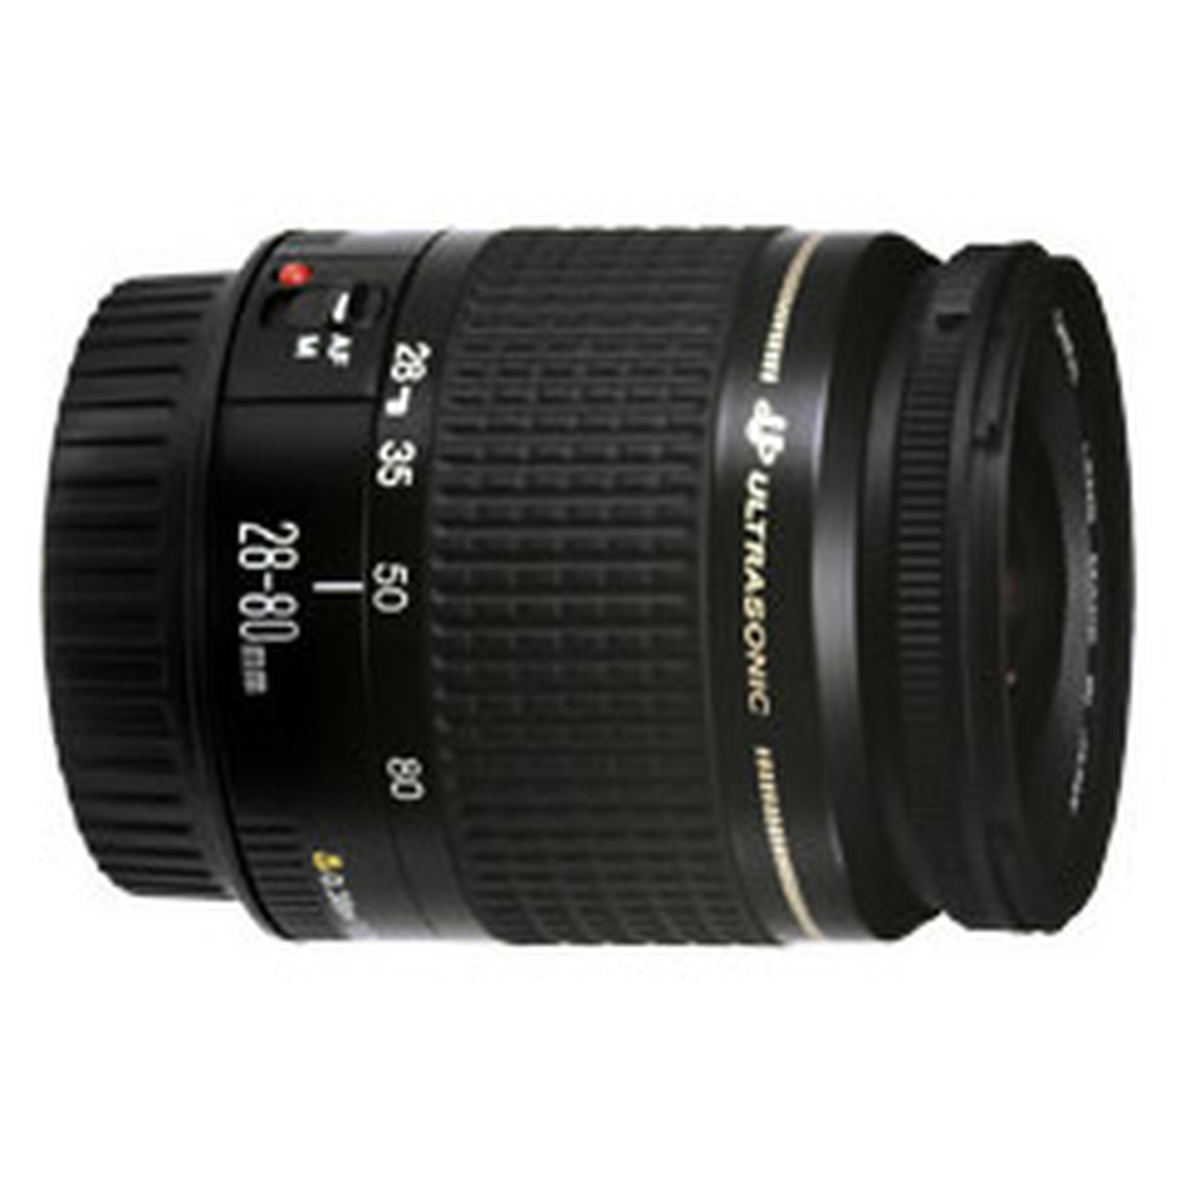 Canon EF 28-80mm f/3.5-5.6 III USM : Specifications and Opinions | JuzaPhoto